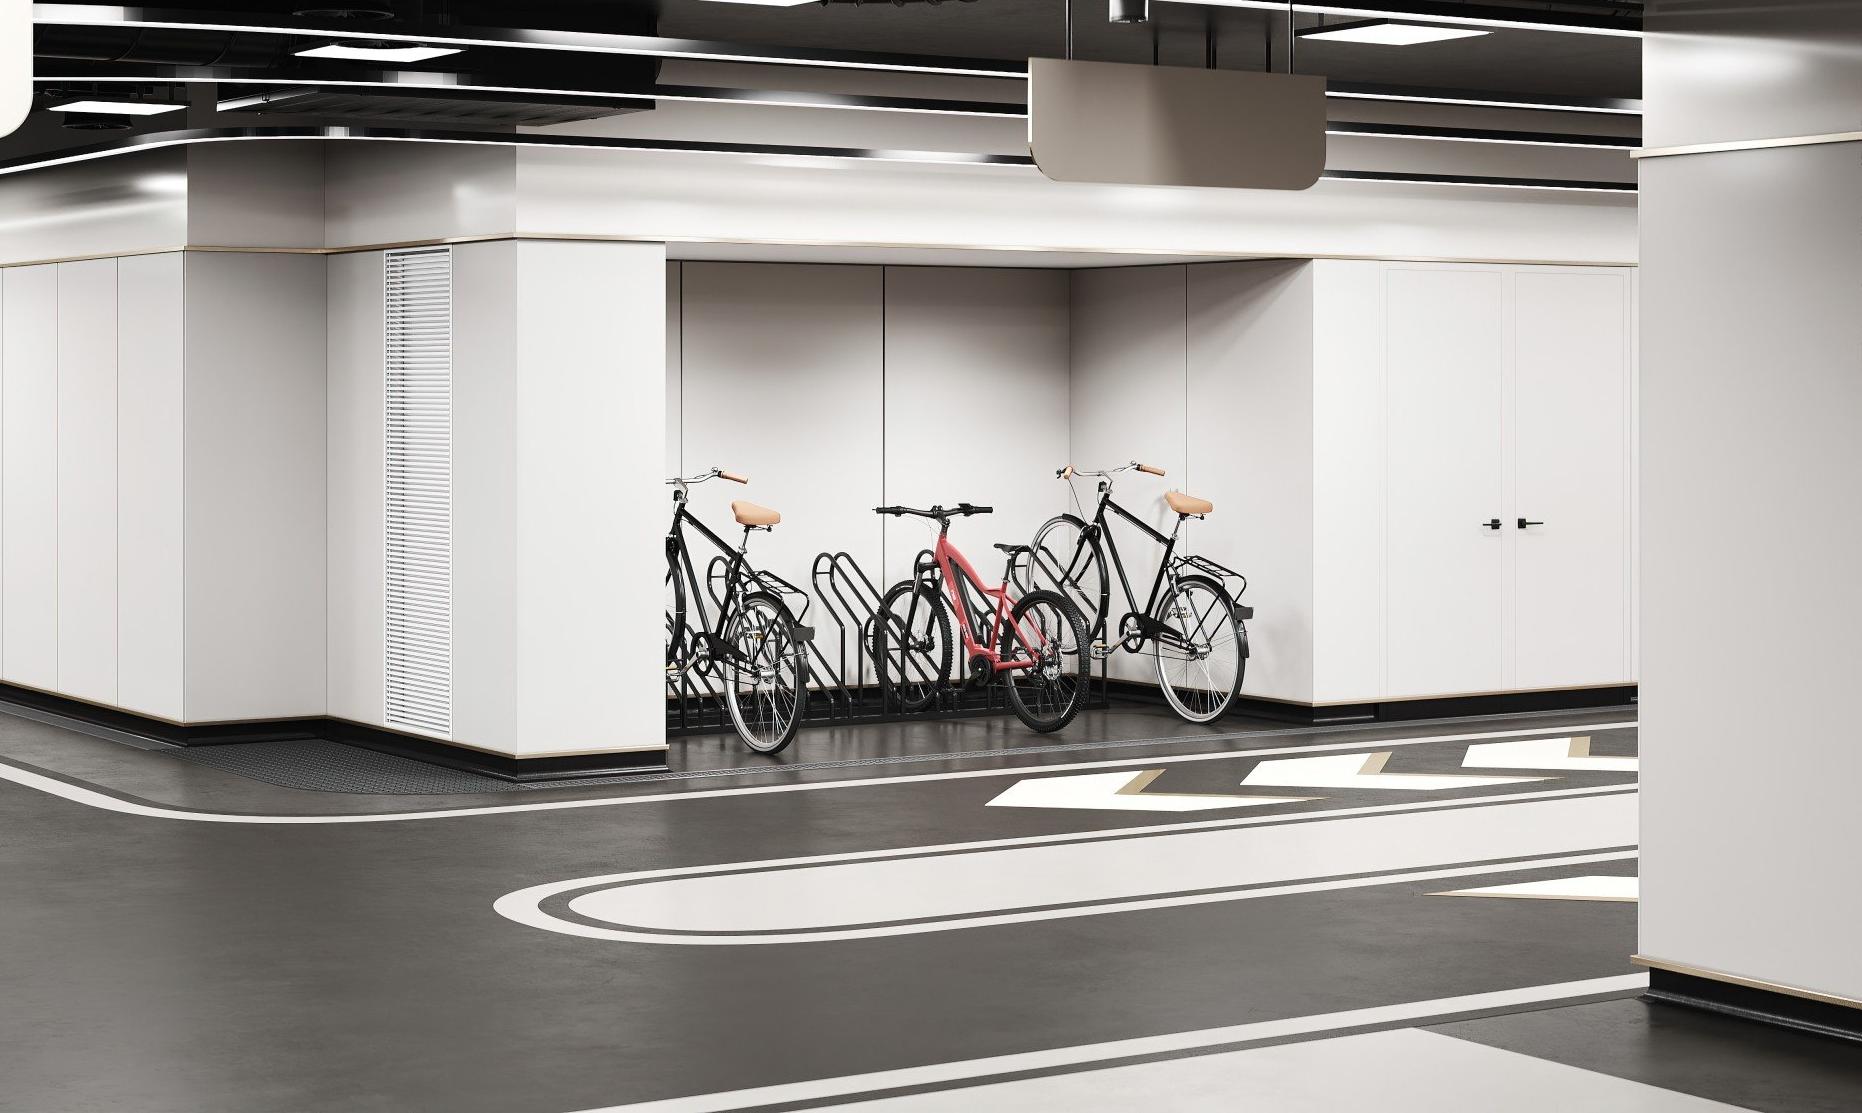 Bicycle storage area in the underground parking lot